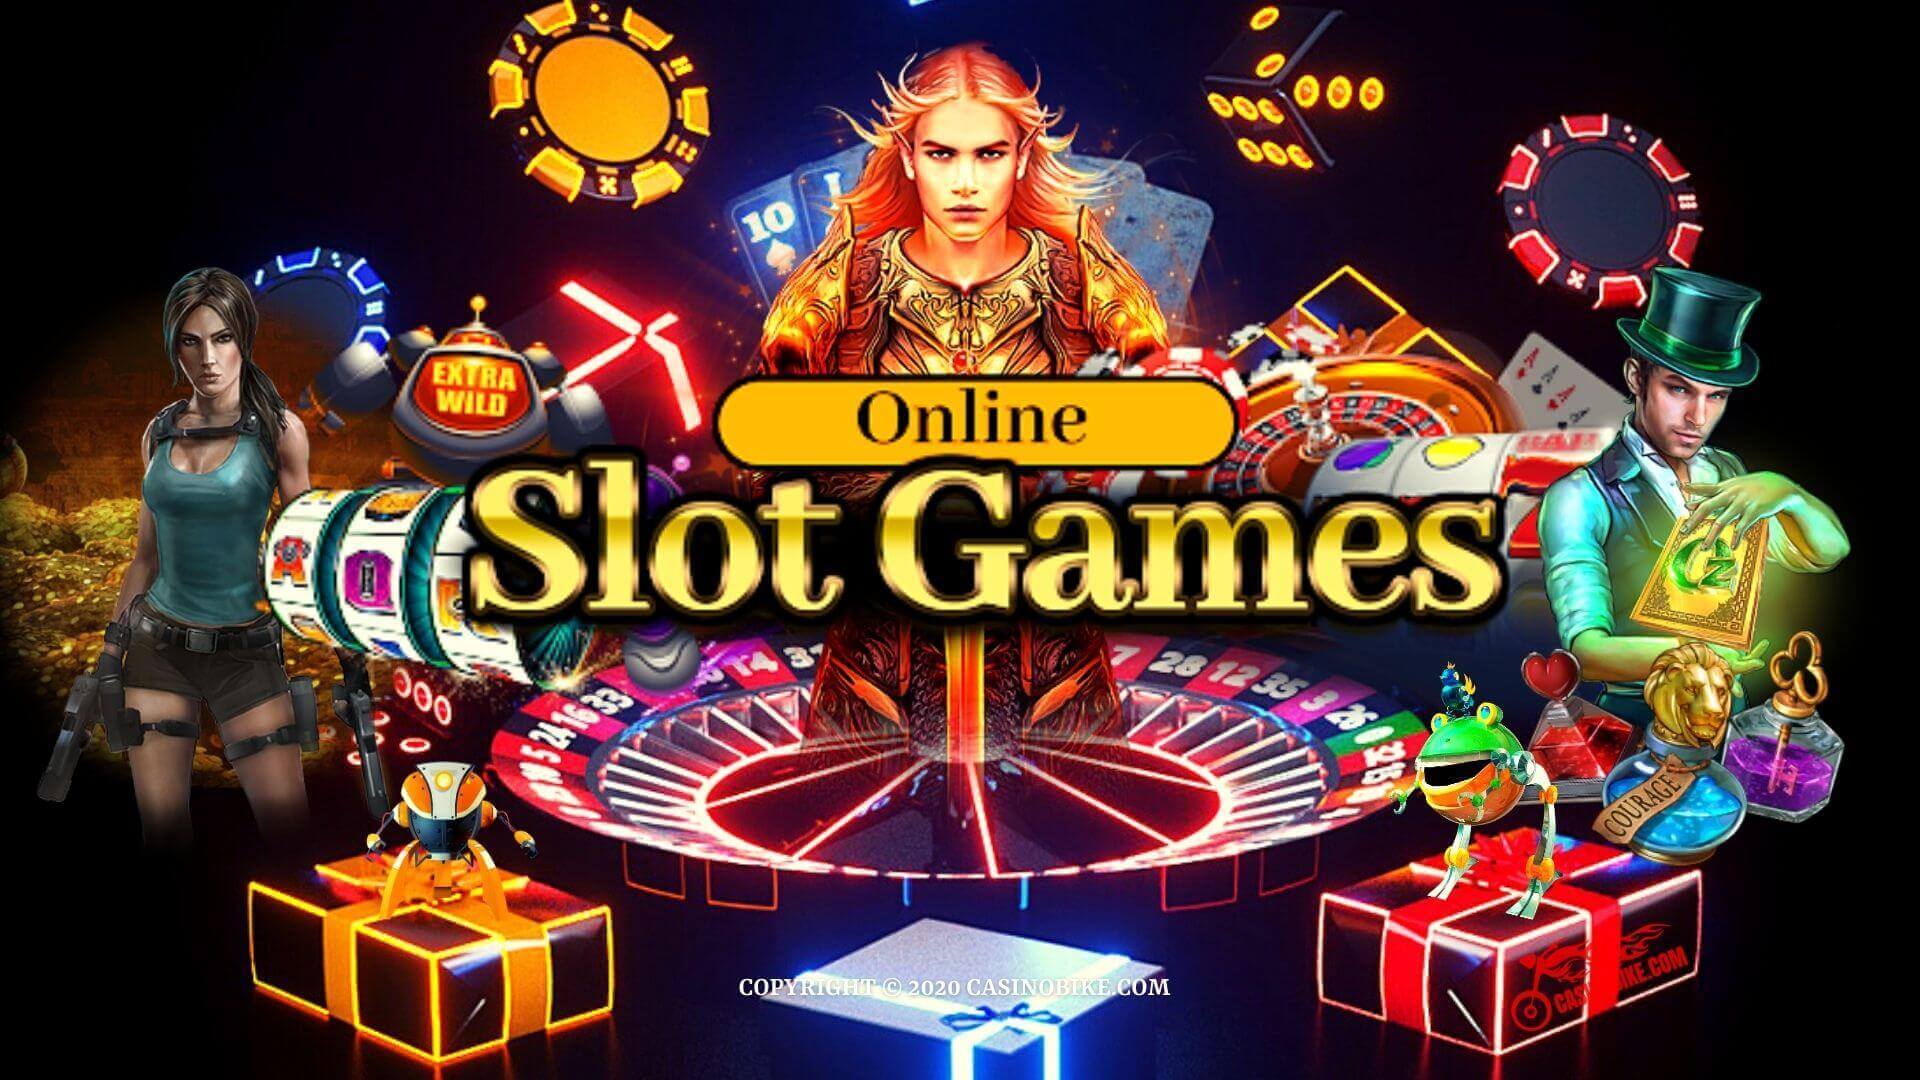 100 Ways online slots for real money Can Make You Invincible